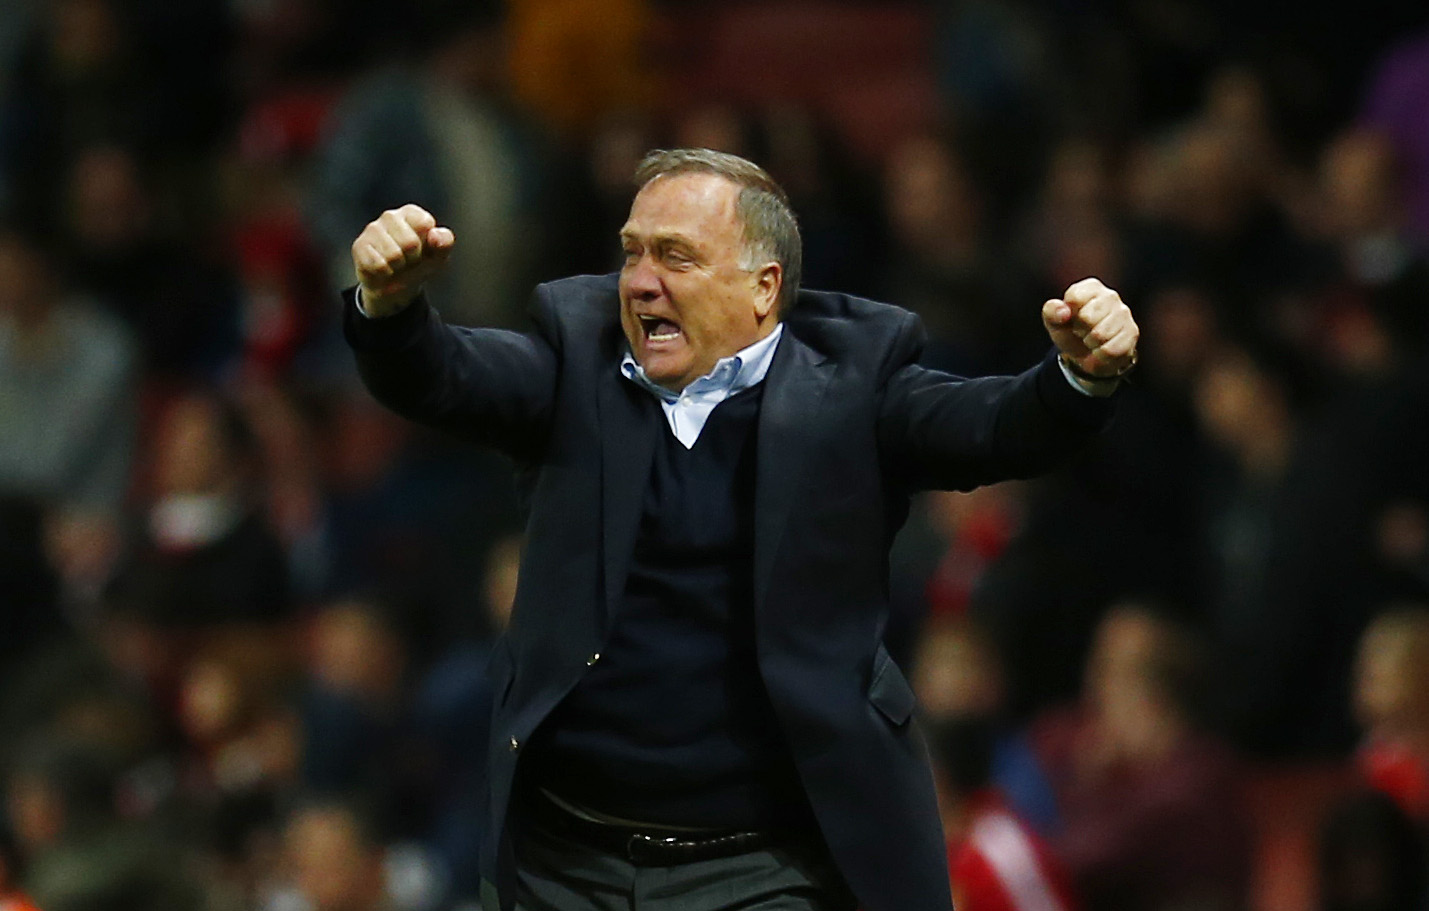 Sunderland manager Dick Advocaat celebrates a 0-0 draw at Arsenal - and avoiding relegation. Photo: Reuters